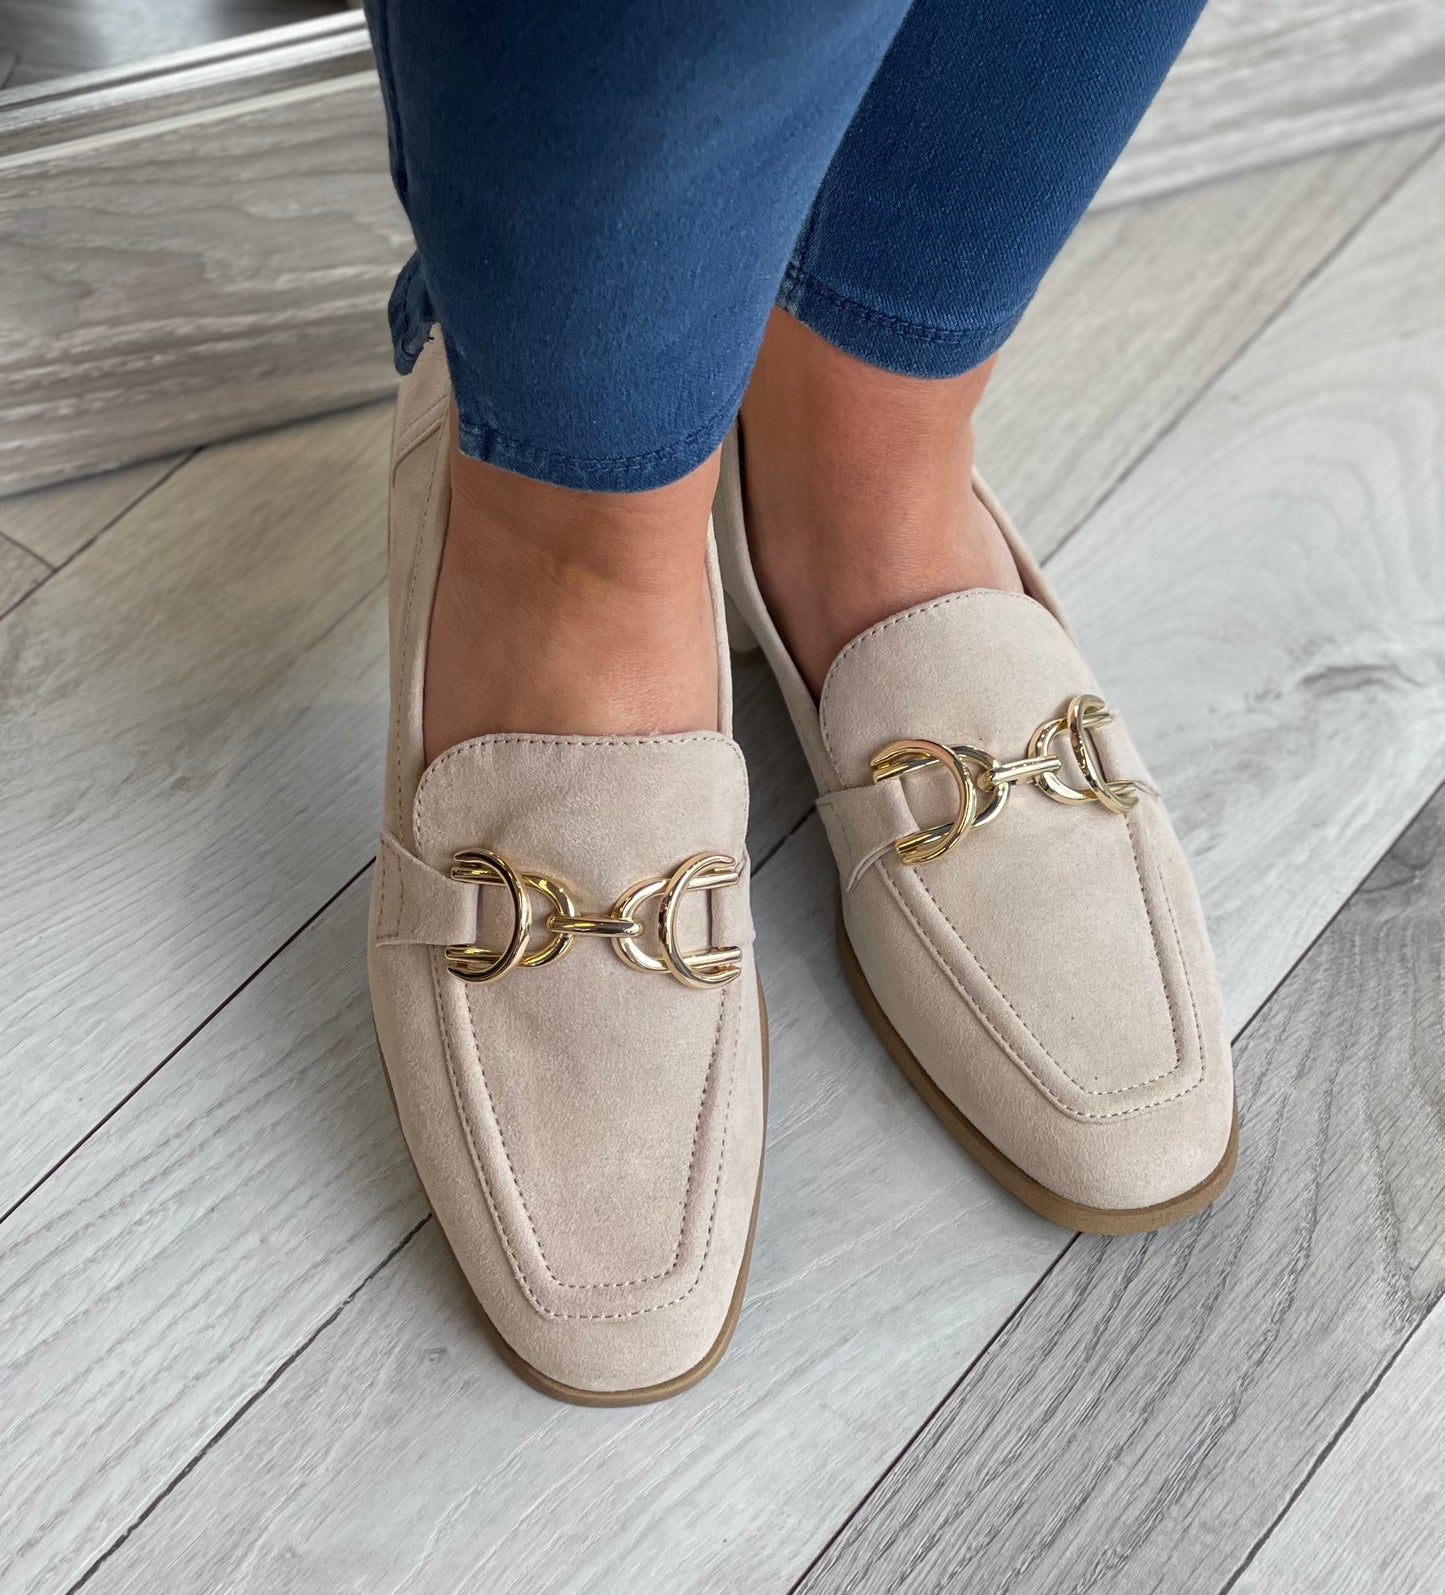 Marco Tozzi - Dune Chain Detail Loafer